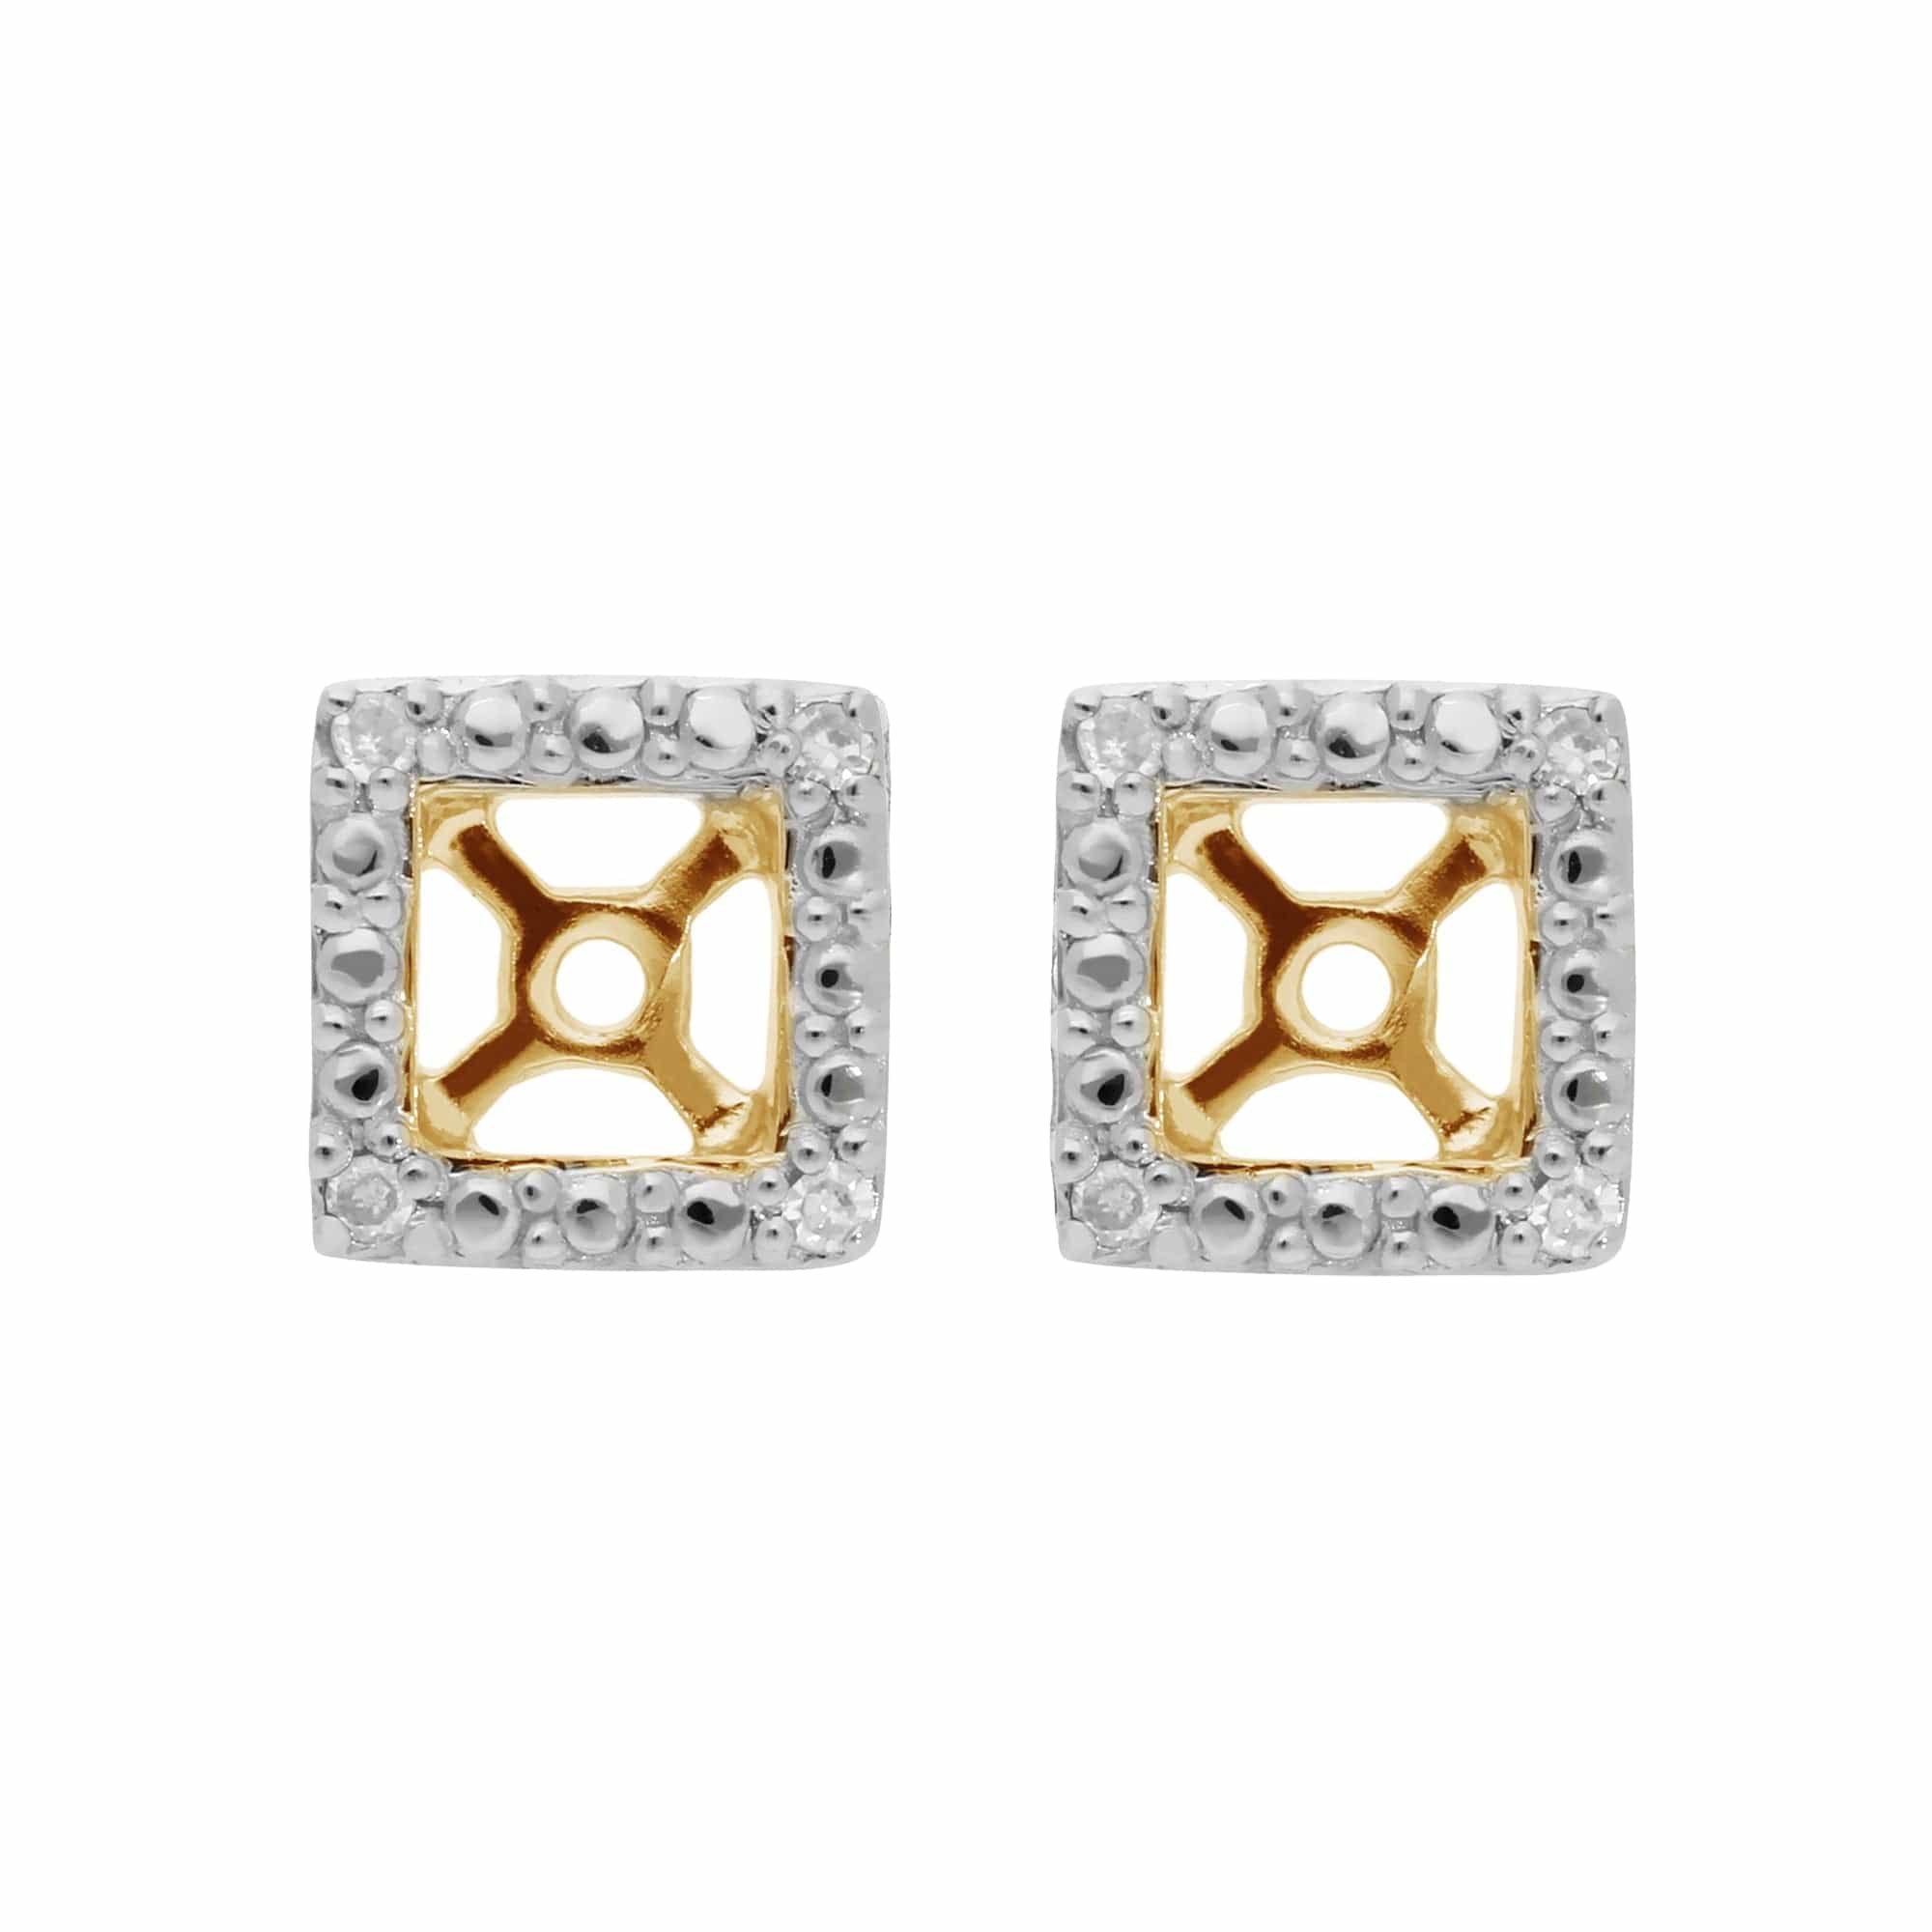 Classic Round Peridot Stud Earrings with Detachable Diamond Square Earrings Jacket Set in 9ct Yellow Gold - Gemondo